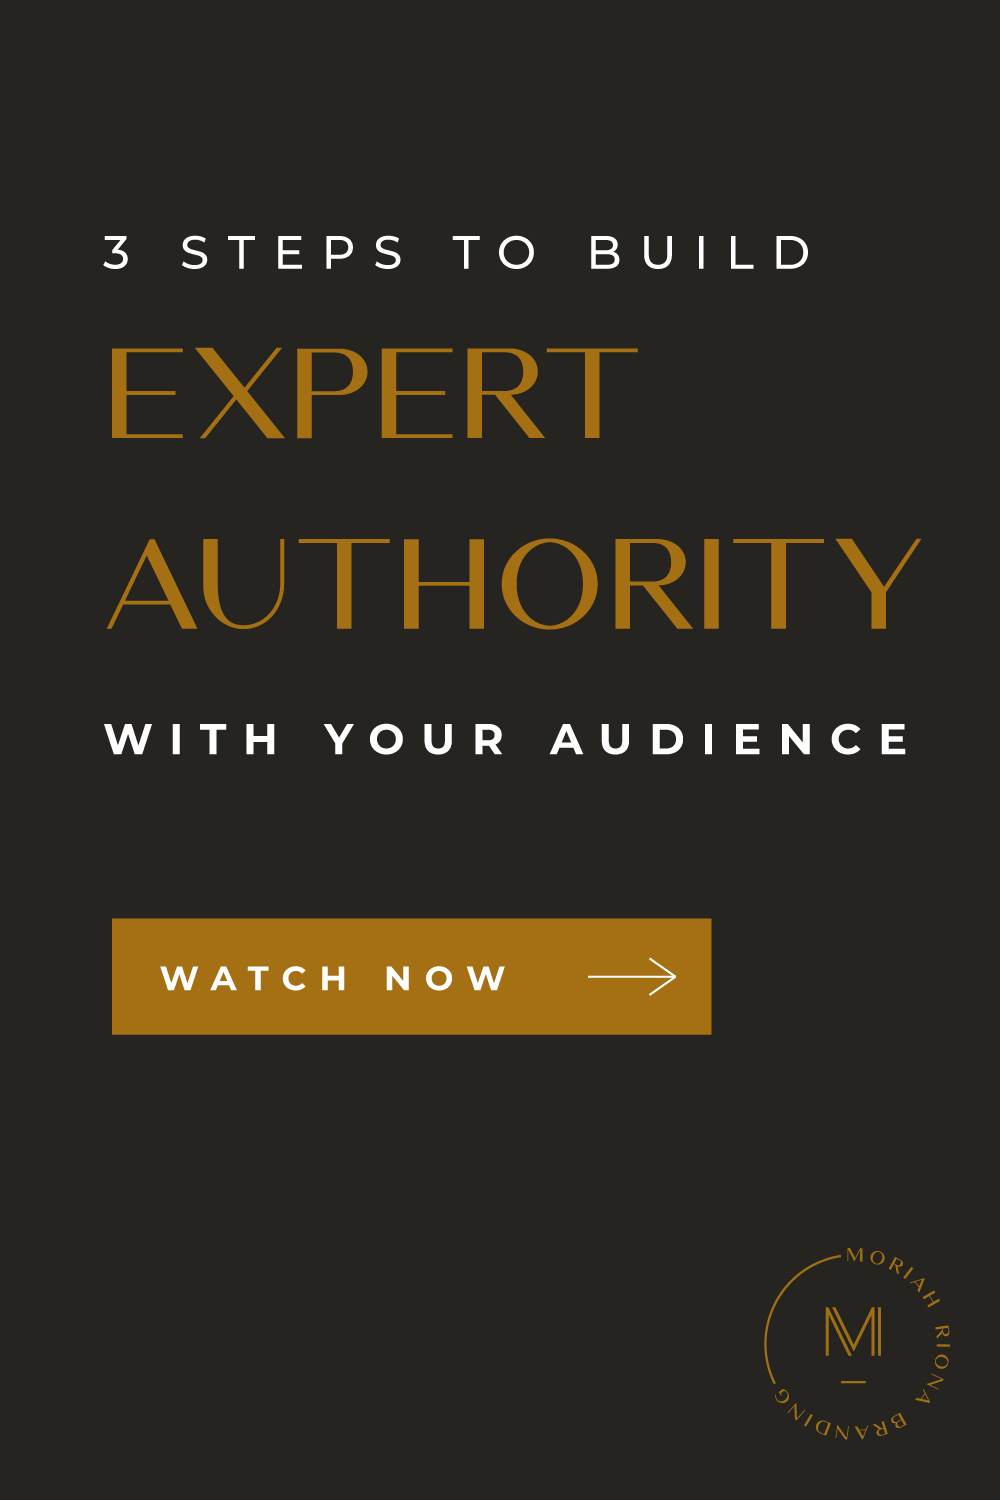 How to be a leader, how to be a leader in your niche, niche authority, expert authority, industry leader, thought leader, how to become a leader, how to become a thought leader, entrepreneurship, online business, business growth strategy, growing your authority, tips for entrepreneurs, tips for life coaches, coaching business, how to start a coaching business, build your authority, how to determine your niche, niche branding, coaching niche, how to choose your niche, branding, Moriah Riona